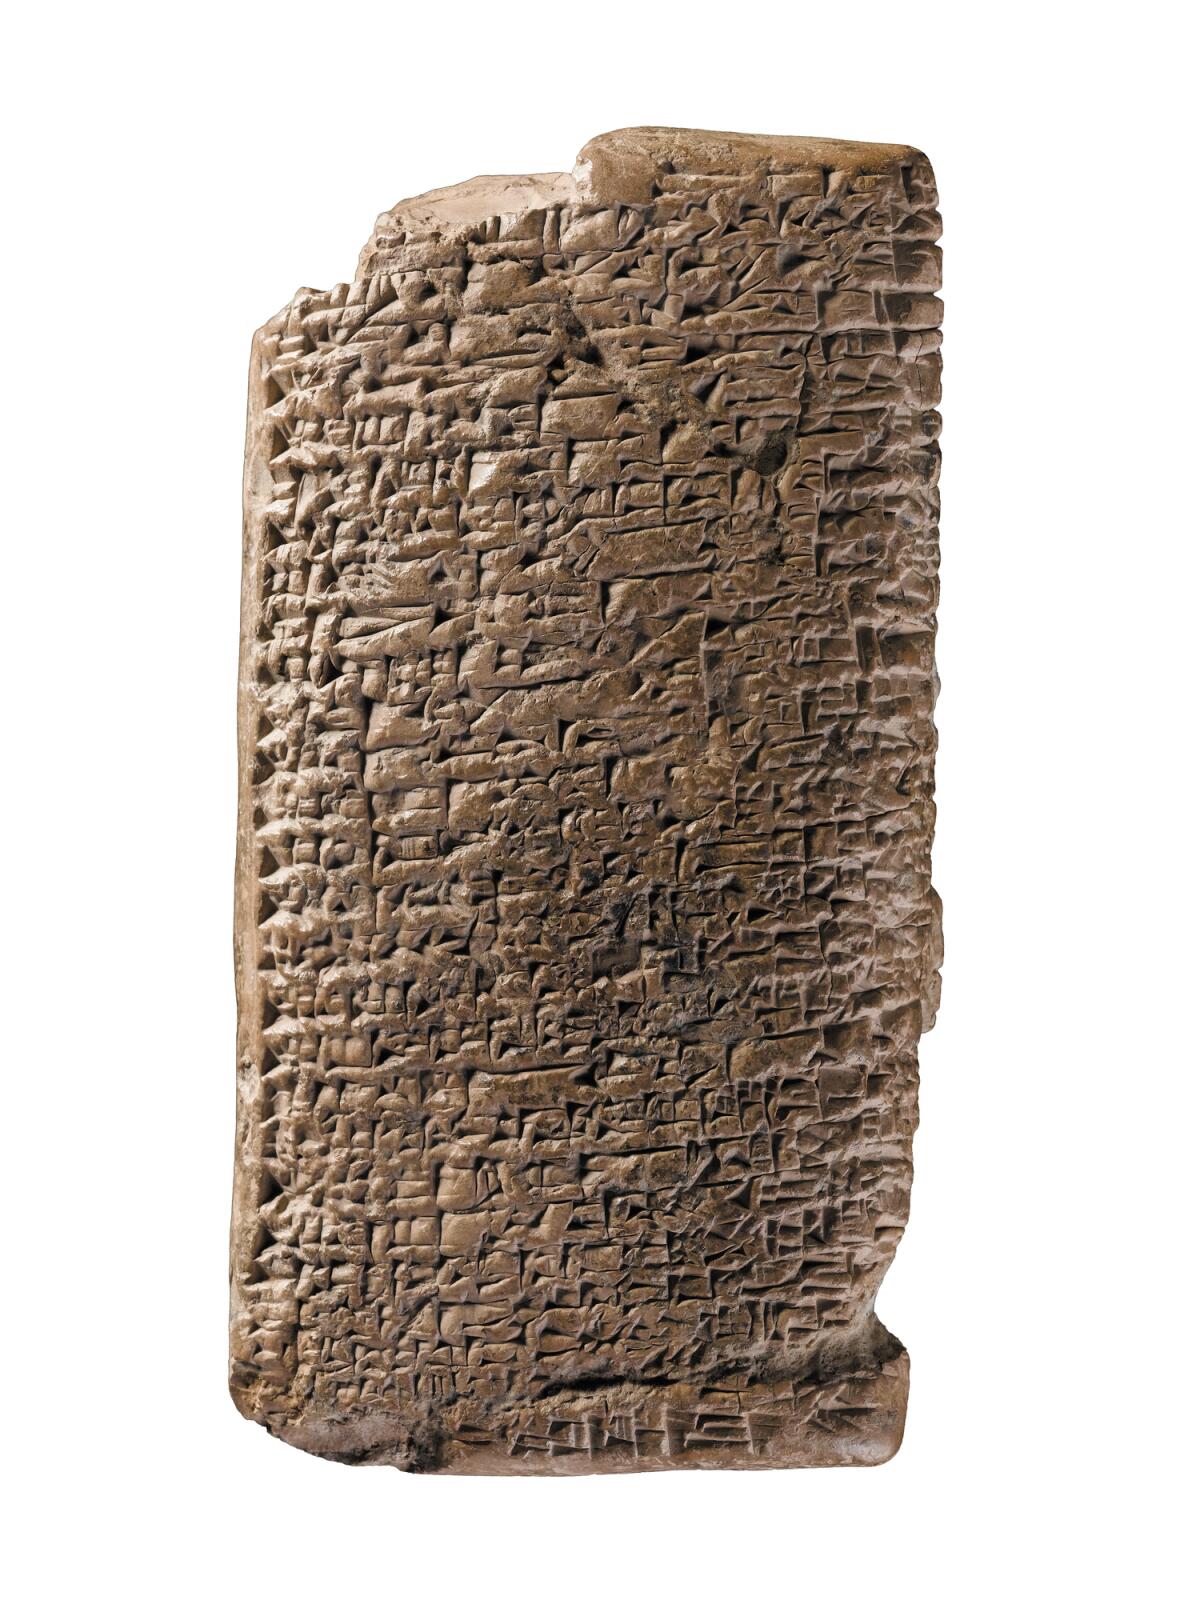 A terra cotta tablet covered in cunieform writing.